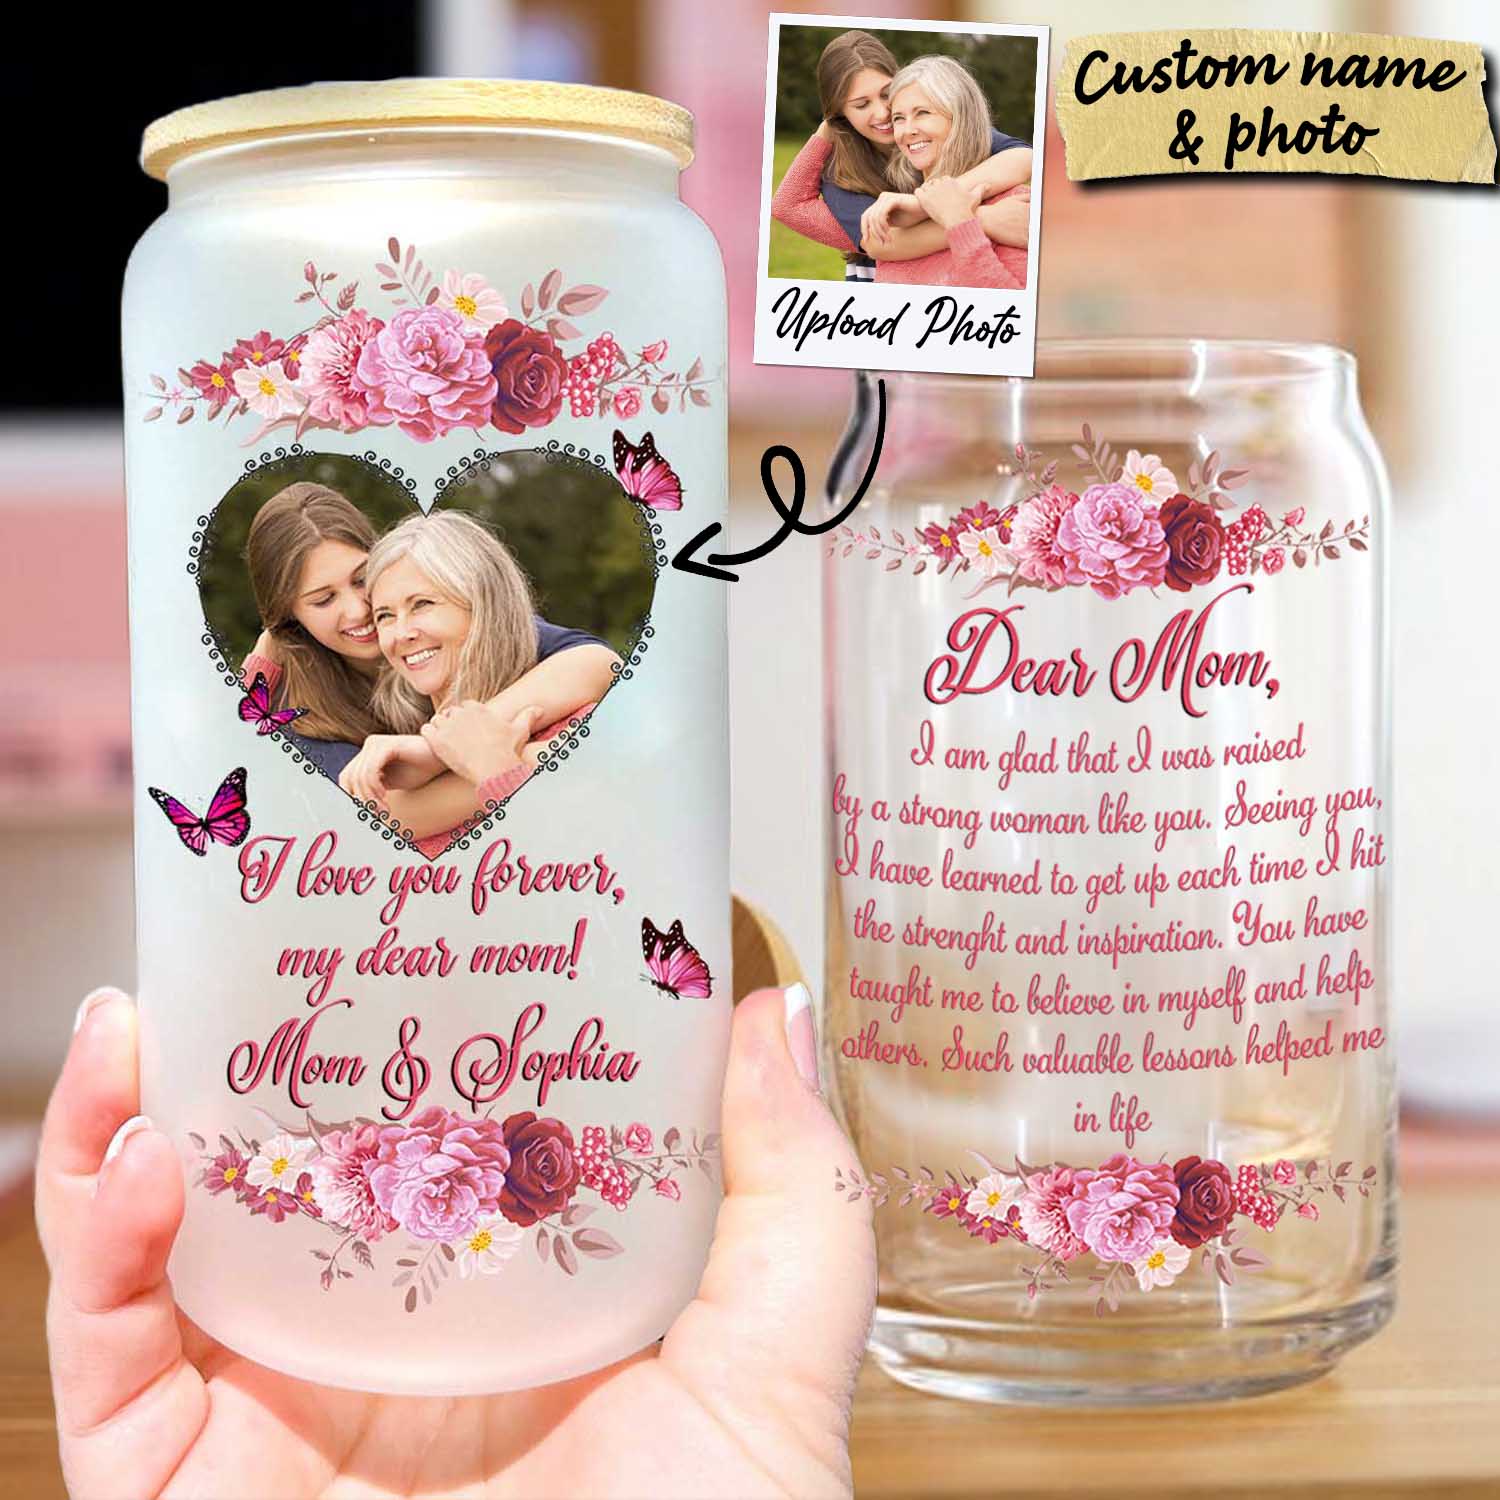 I Love You Forever My Dear Mom - Custom Photo And Names - Personalized Glass Bottle, Frosted Bottle, Gift For Family, Mother's Day